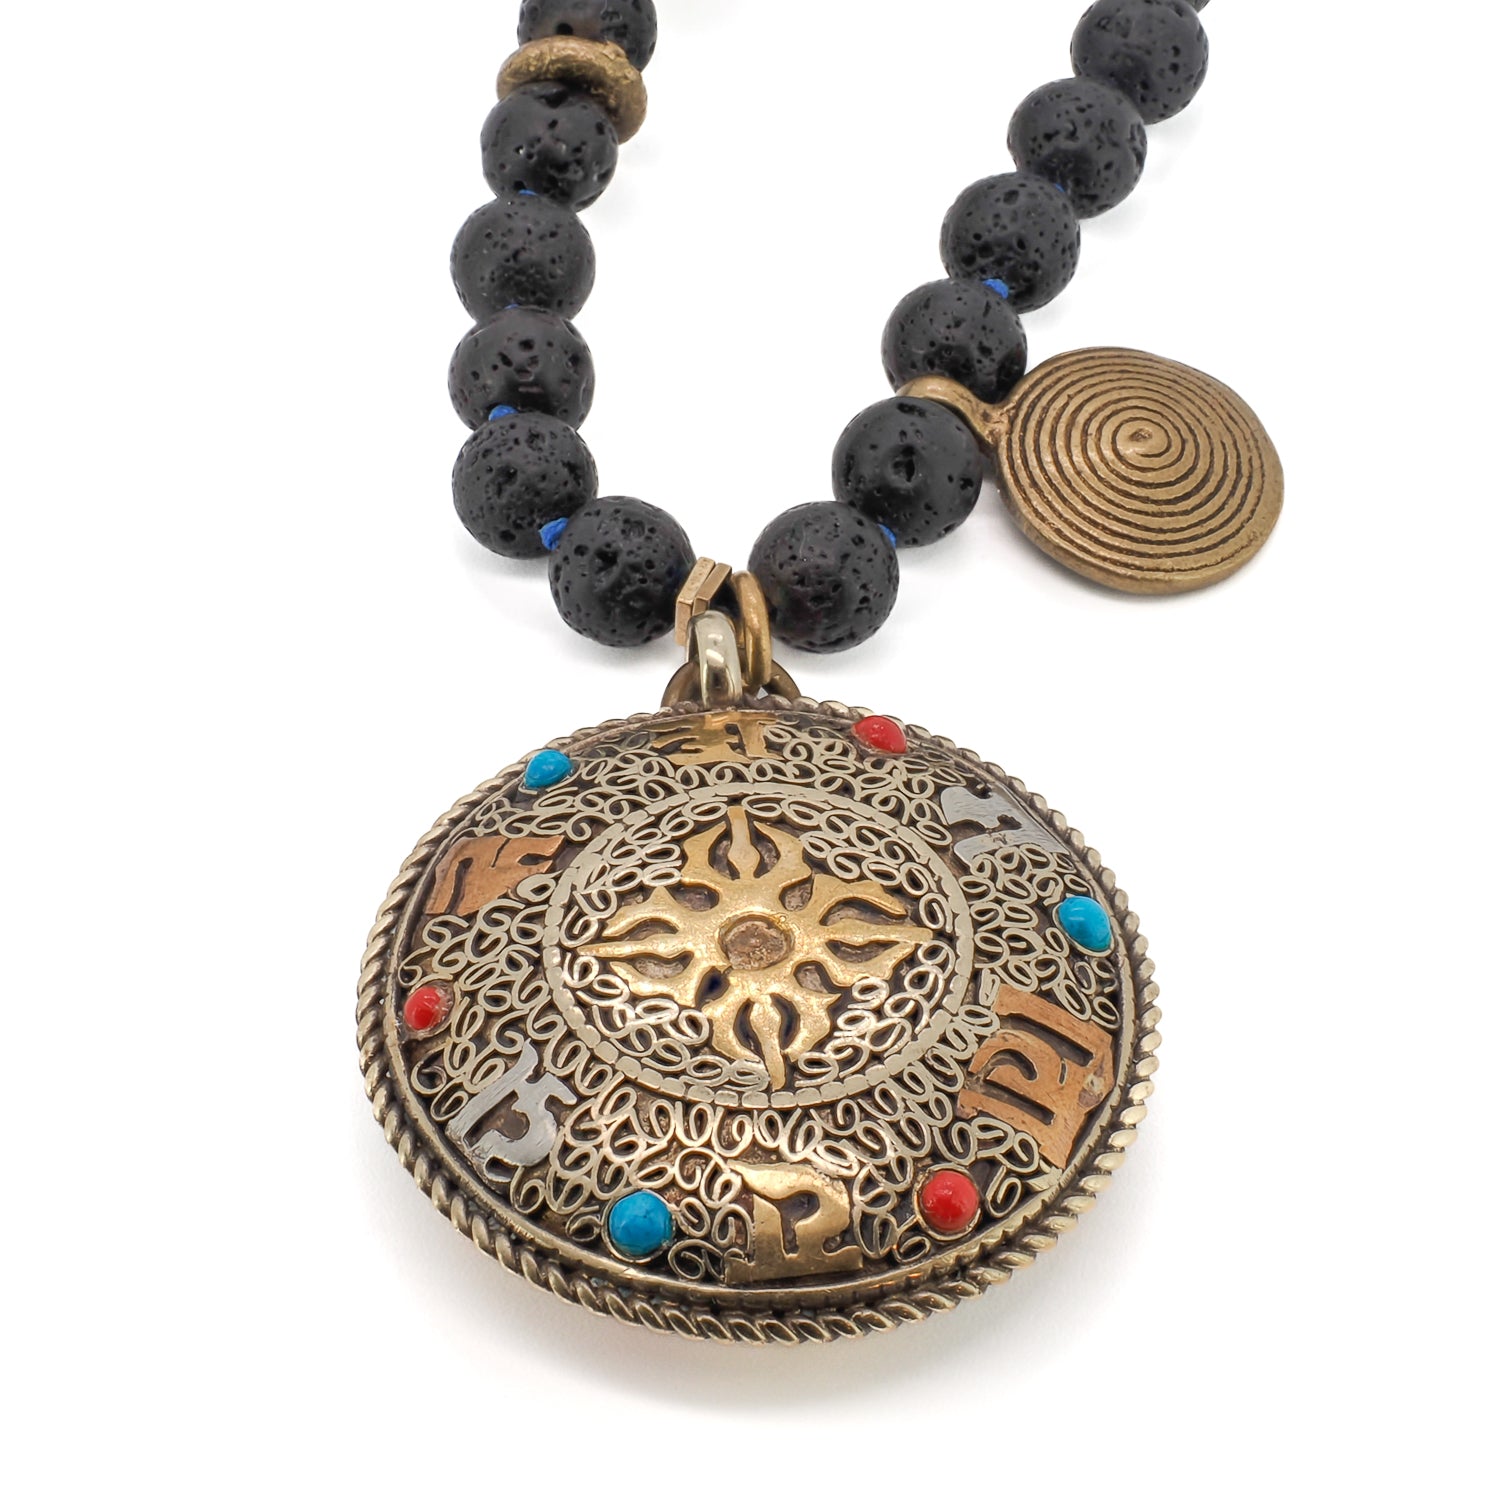 Lapis Lazuli and Brass Tibetan Bead: Handmade for Cultural Significance